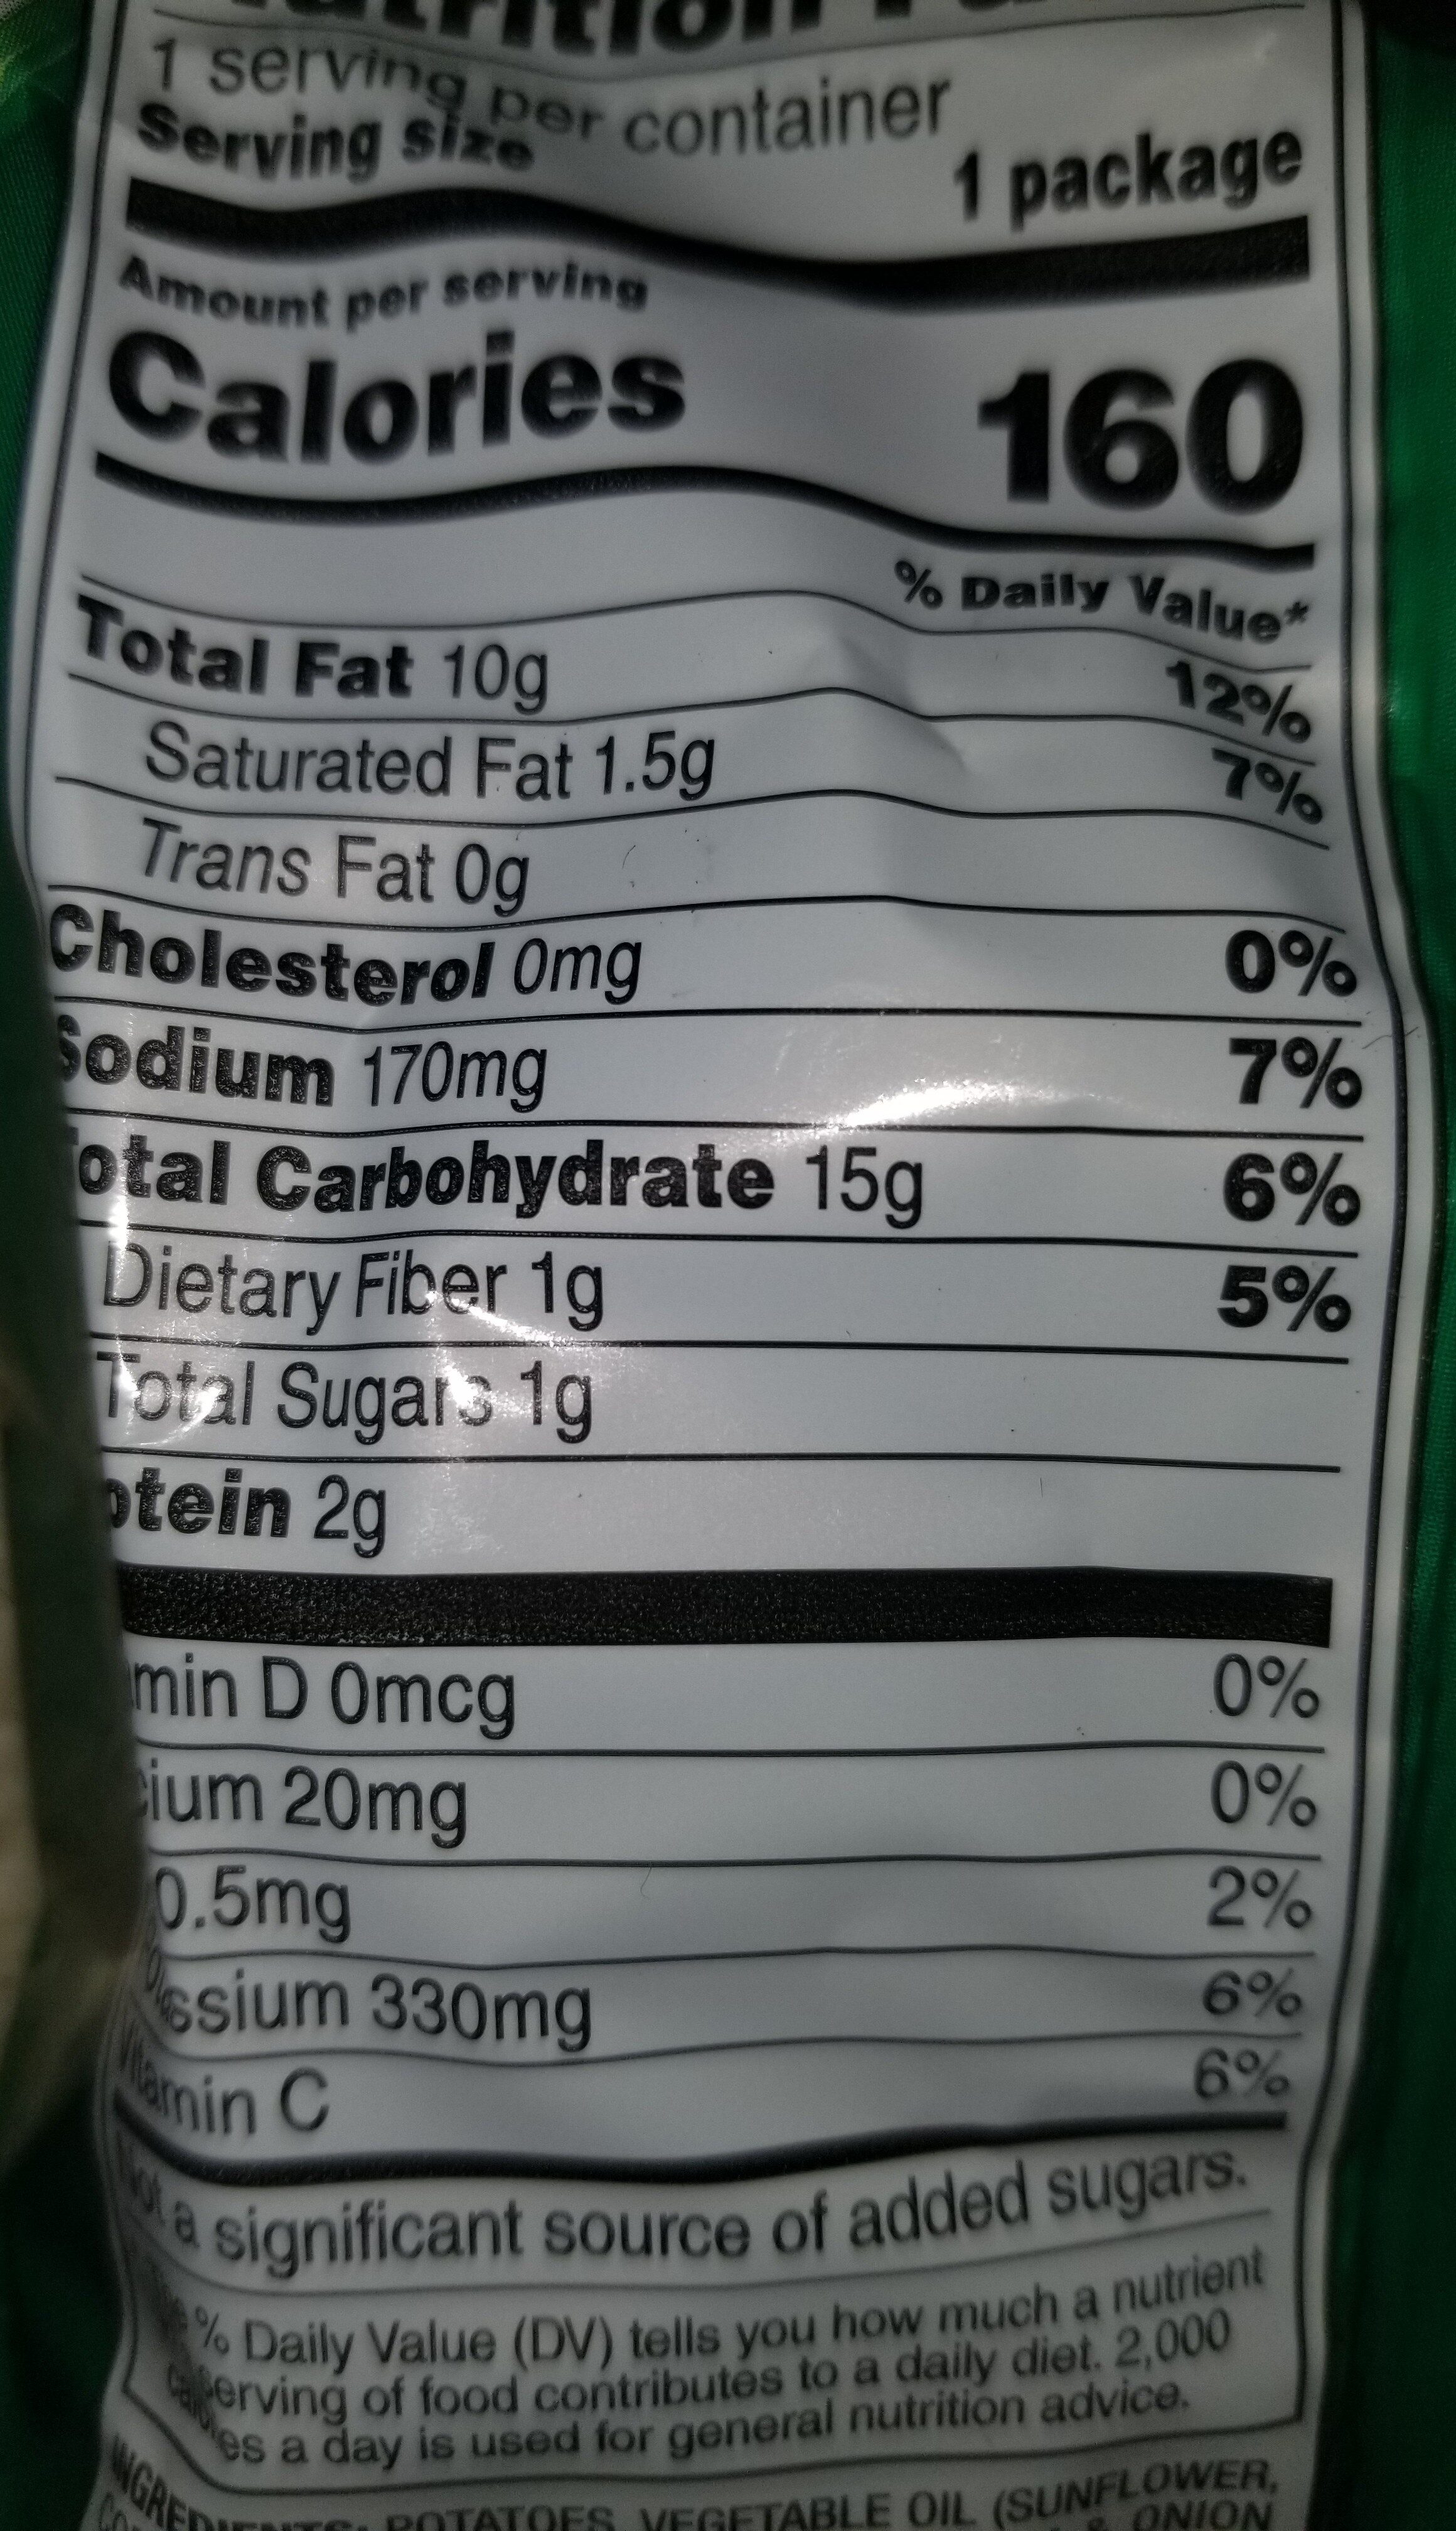 sour cream and onionlays potatoe chips - Nutrition facts